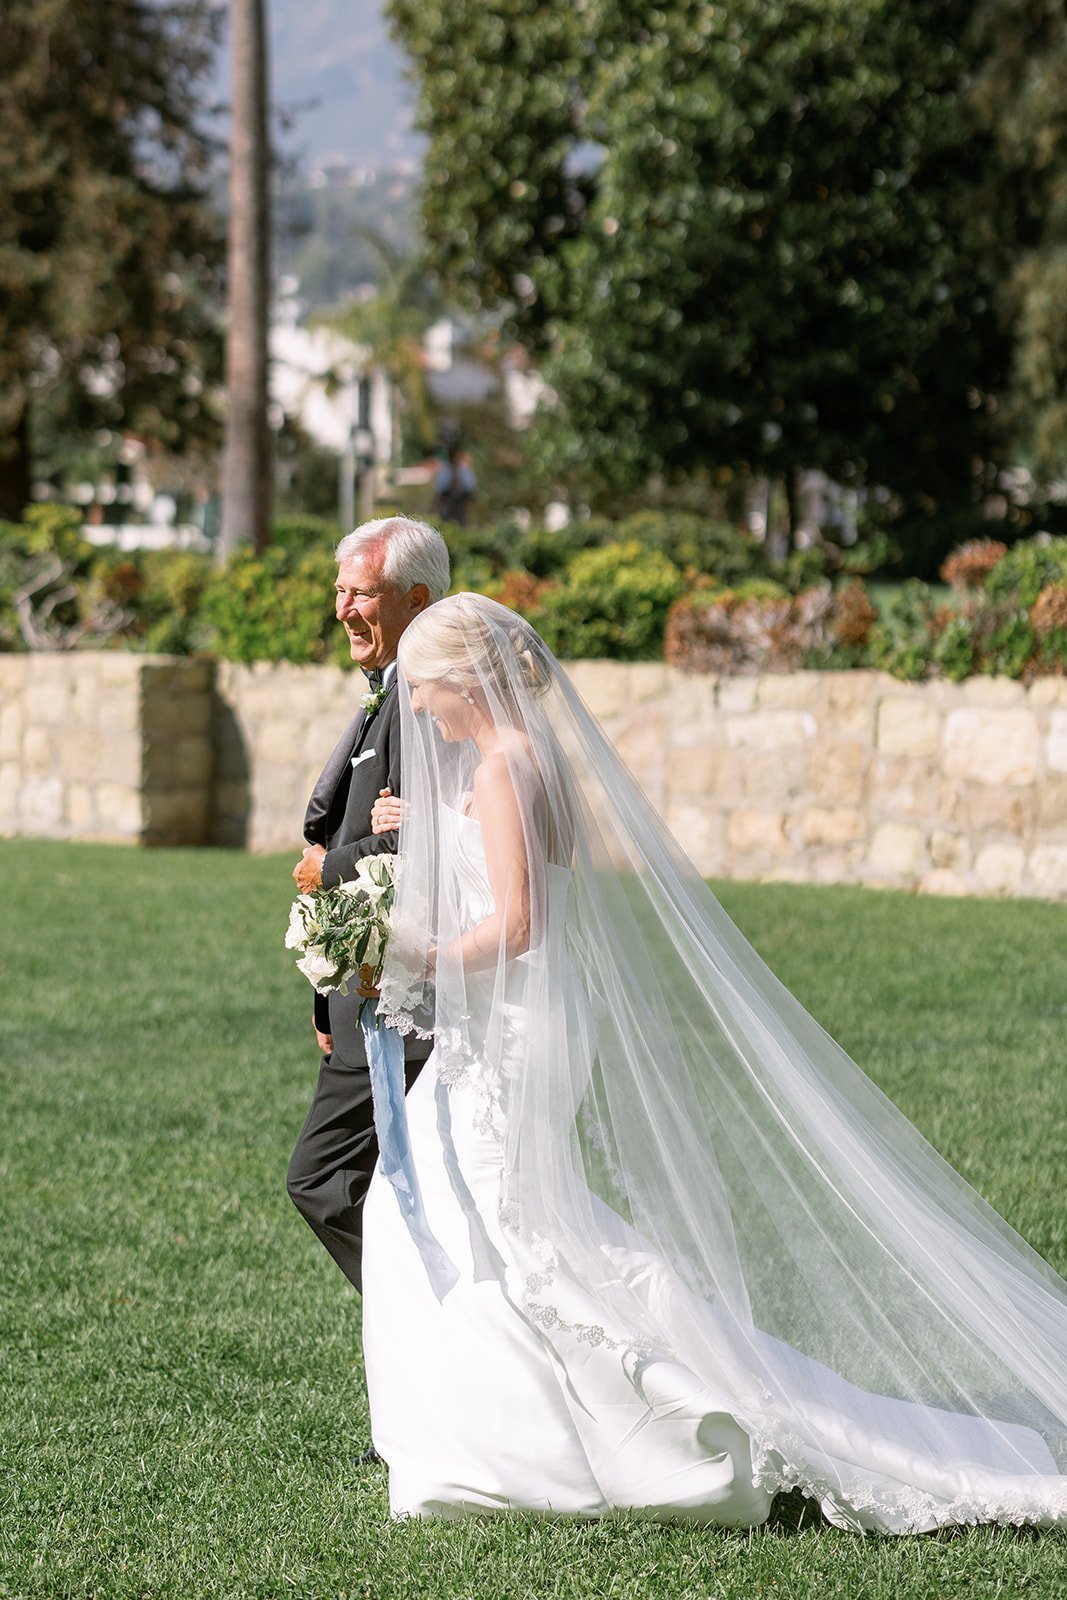 www.santabarbarawedding.com | Santa Barbara Courthouse | Amazing Days Events | Anna Delores Photography | Anna Le Pley Taylor | Ventura Rentals | Anne Barge | Bride Walking Down Aisle with Father